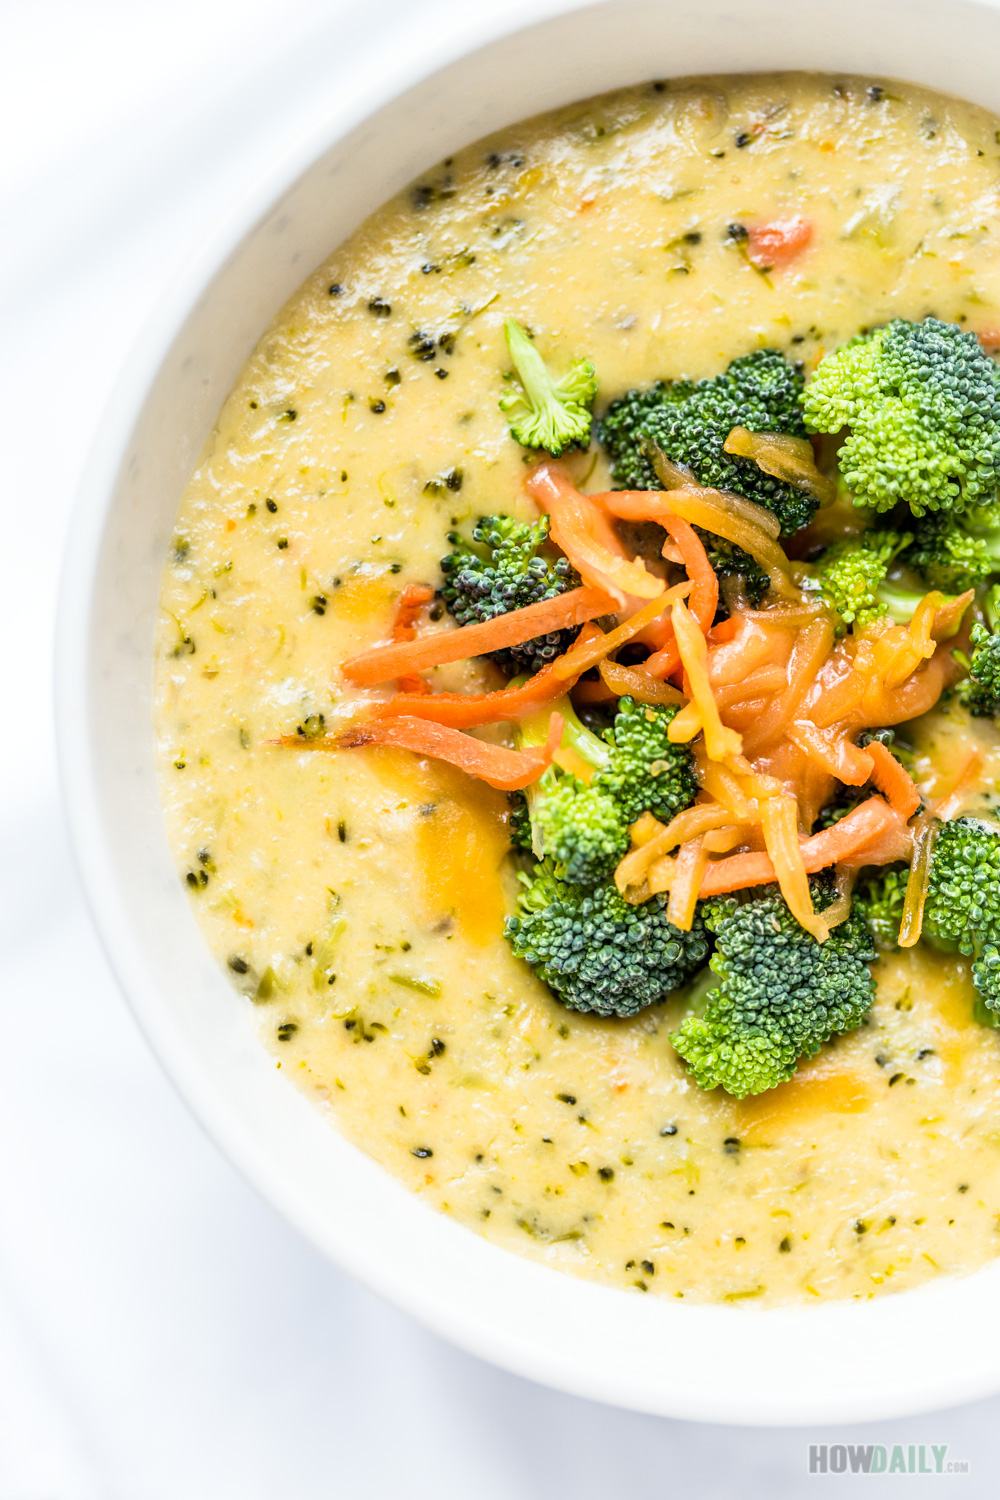 Low-Carb Broccoli Cheese Soup Recipe - Healthy Diet with Creamy Flavor